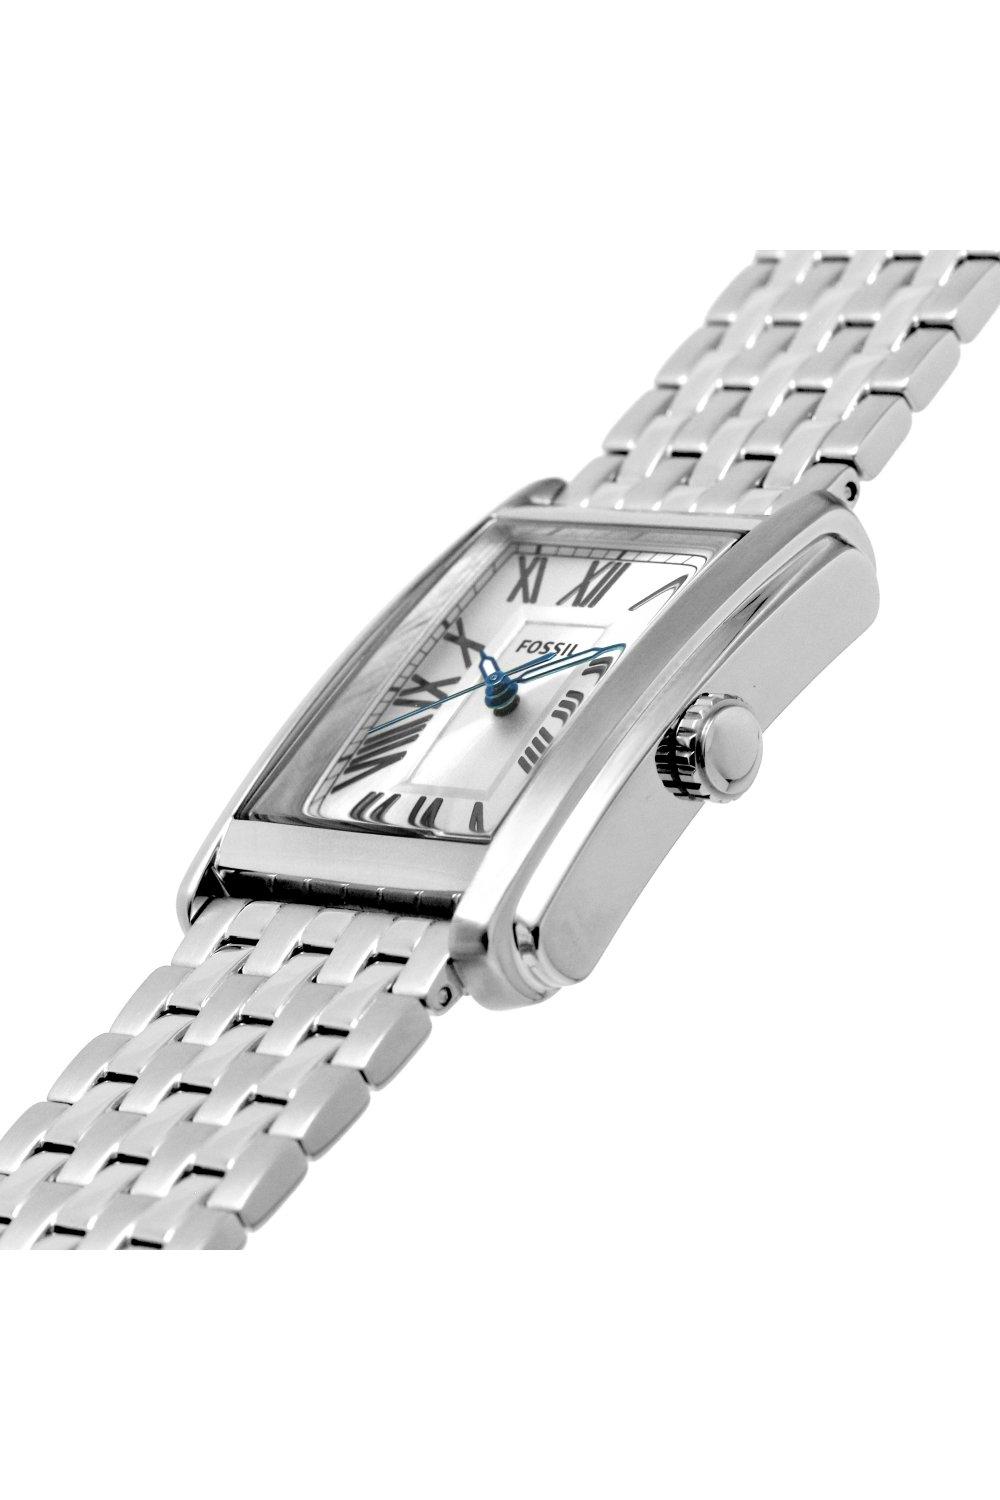 Stainless - Fashion Carraway Fossil Analogue Watches Steel Fs6008 | | Watch Quartz